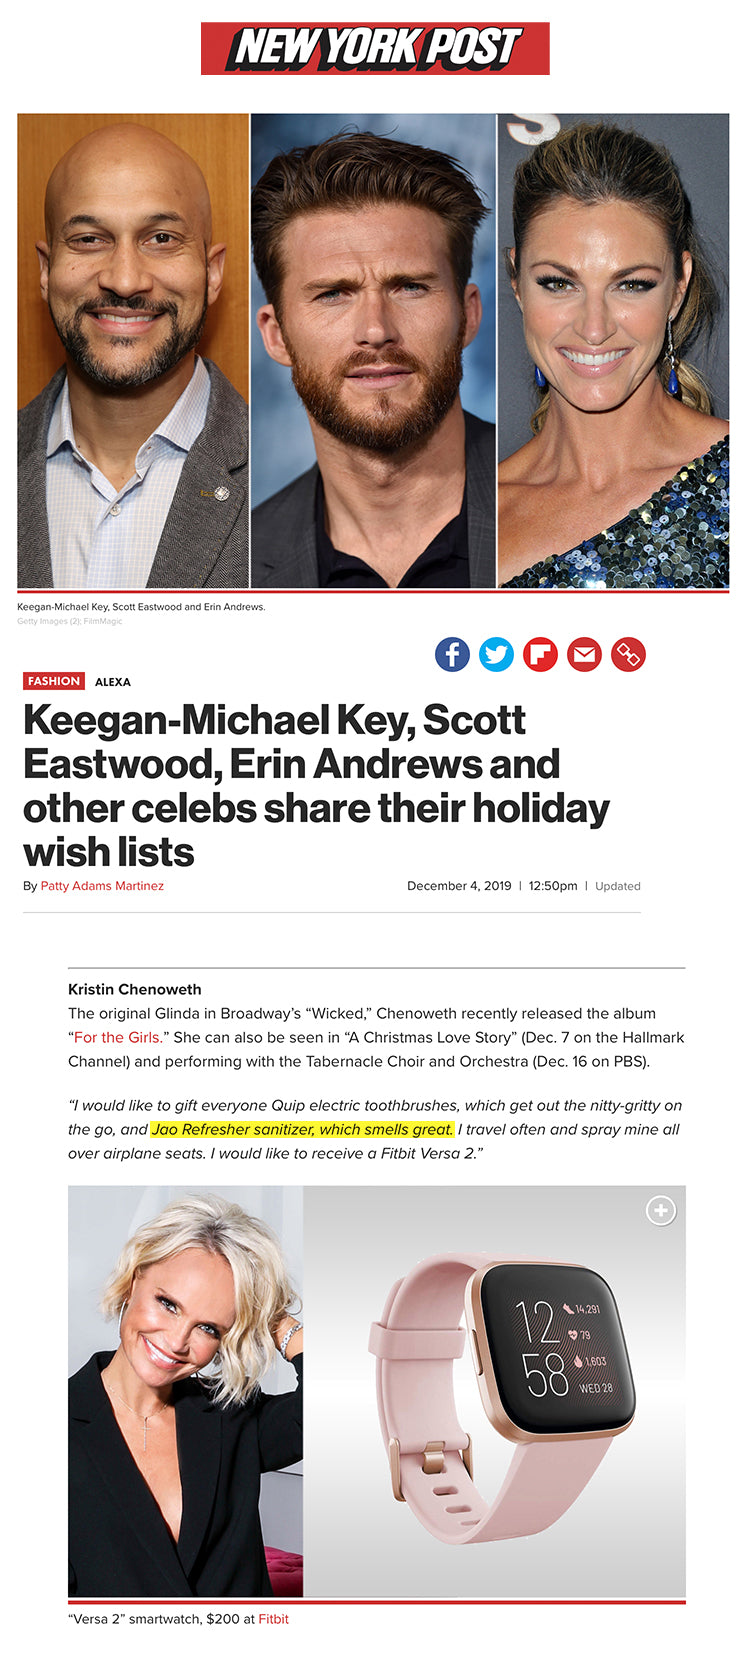 Keegan-Michael Key, Scott Eastwood, Erin Andrews and other celebs share their holiday wish lists. goe oil jao